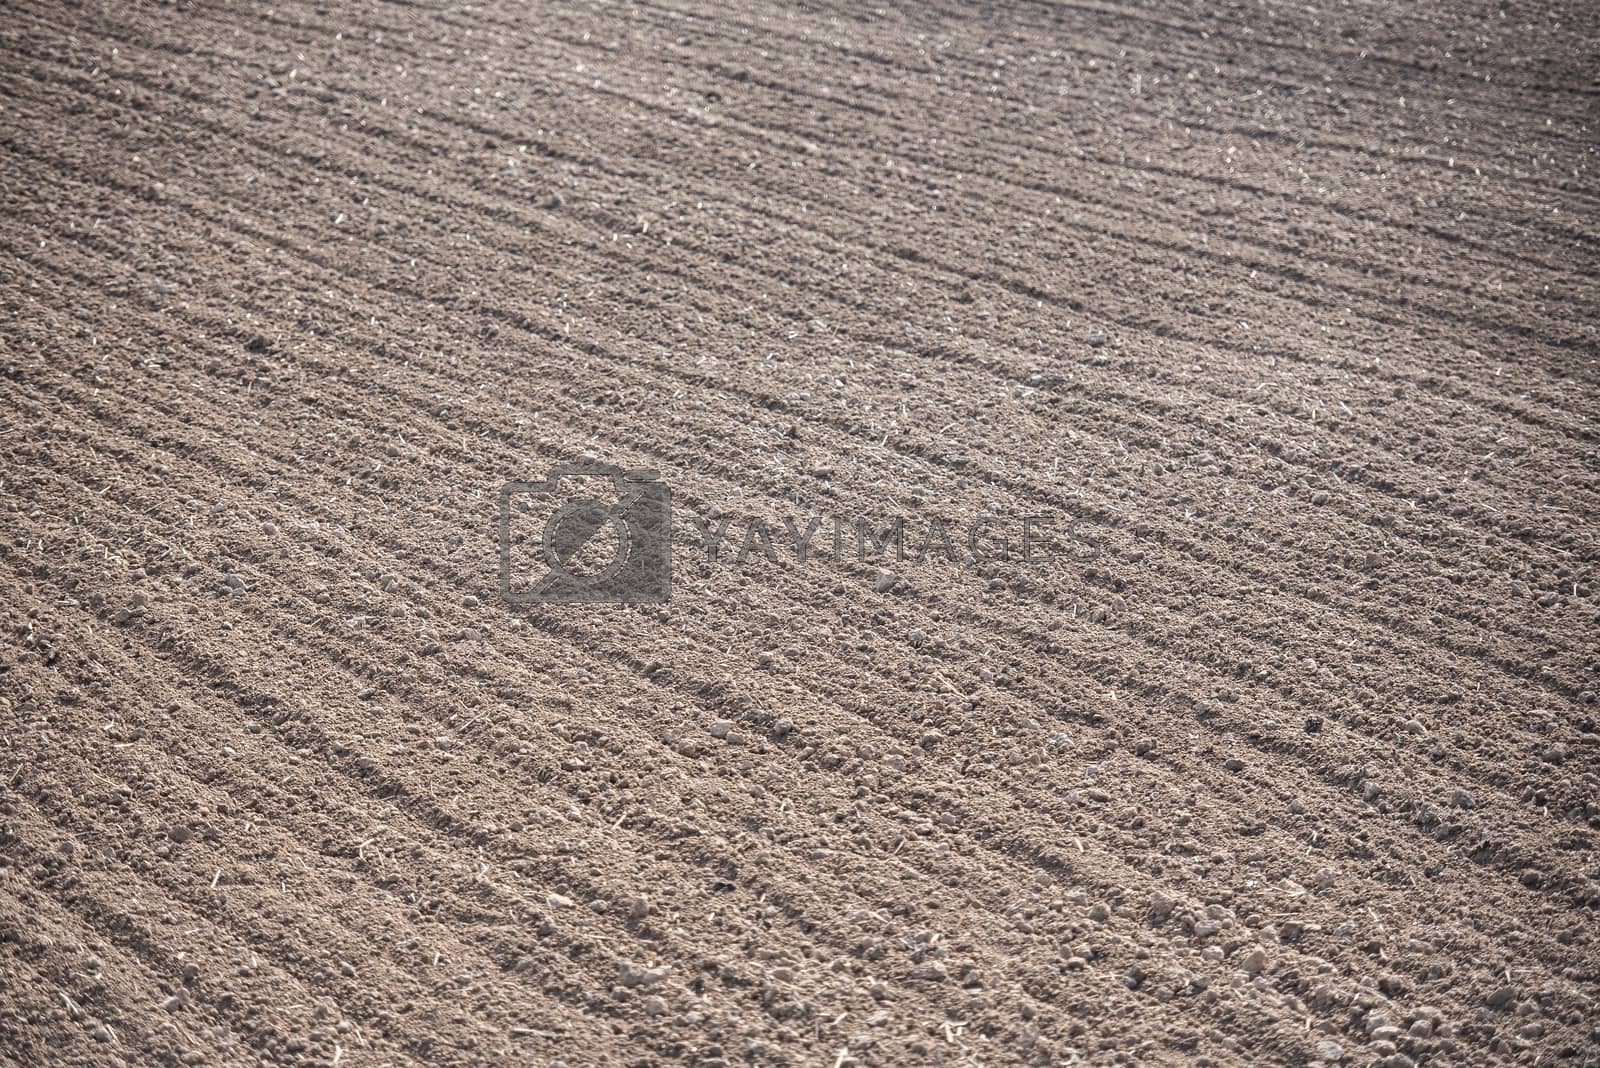 Royalty free image of row in a plow field prepared for planting crops in spring - plow by poring